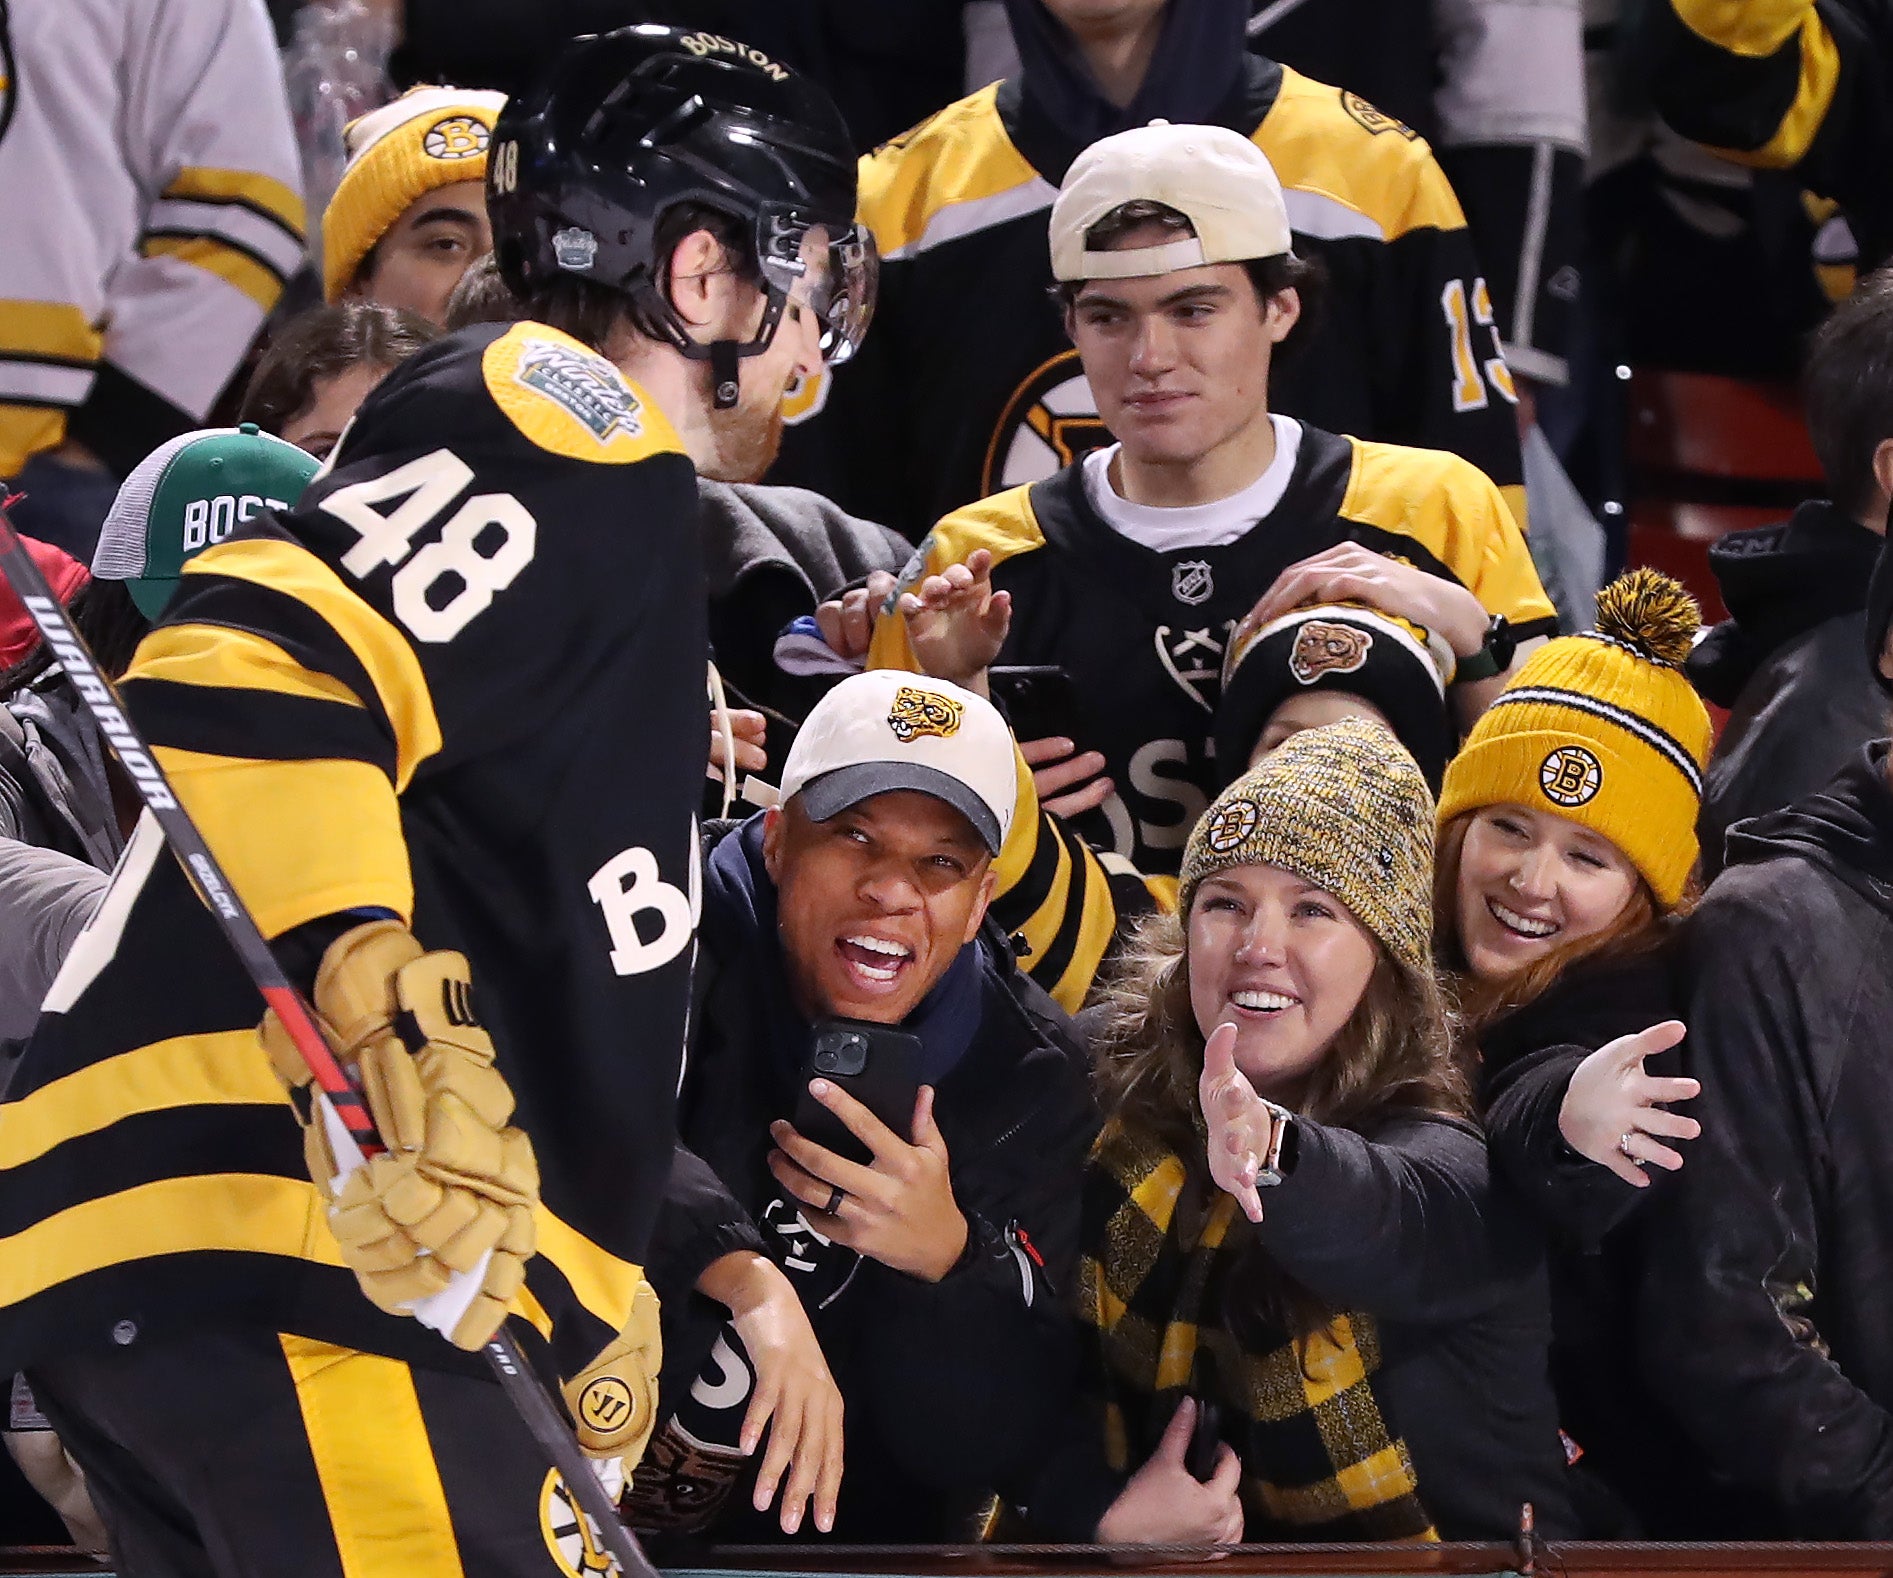 Photos: Bruins Fans Delight in Unbelievable Winter Classic at